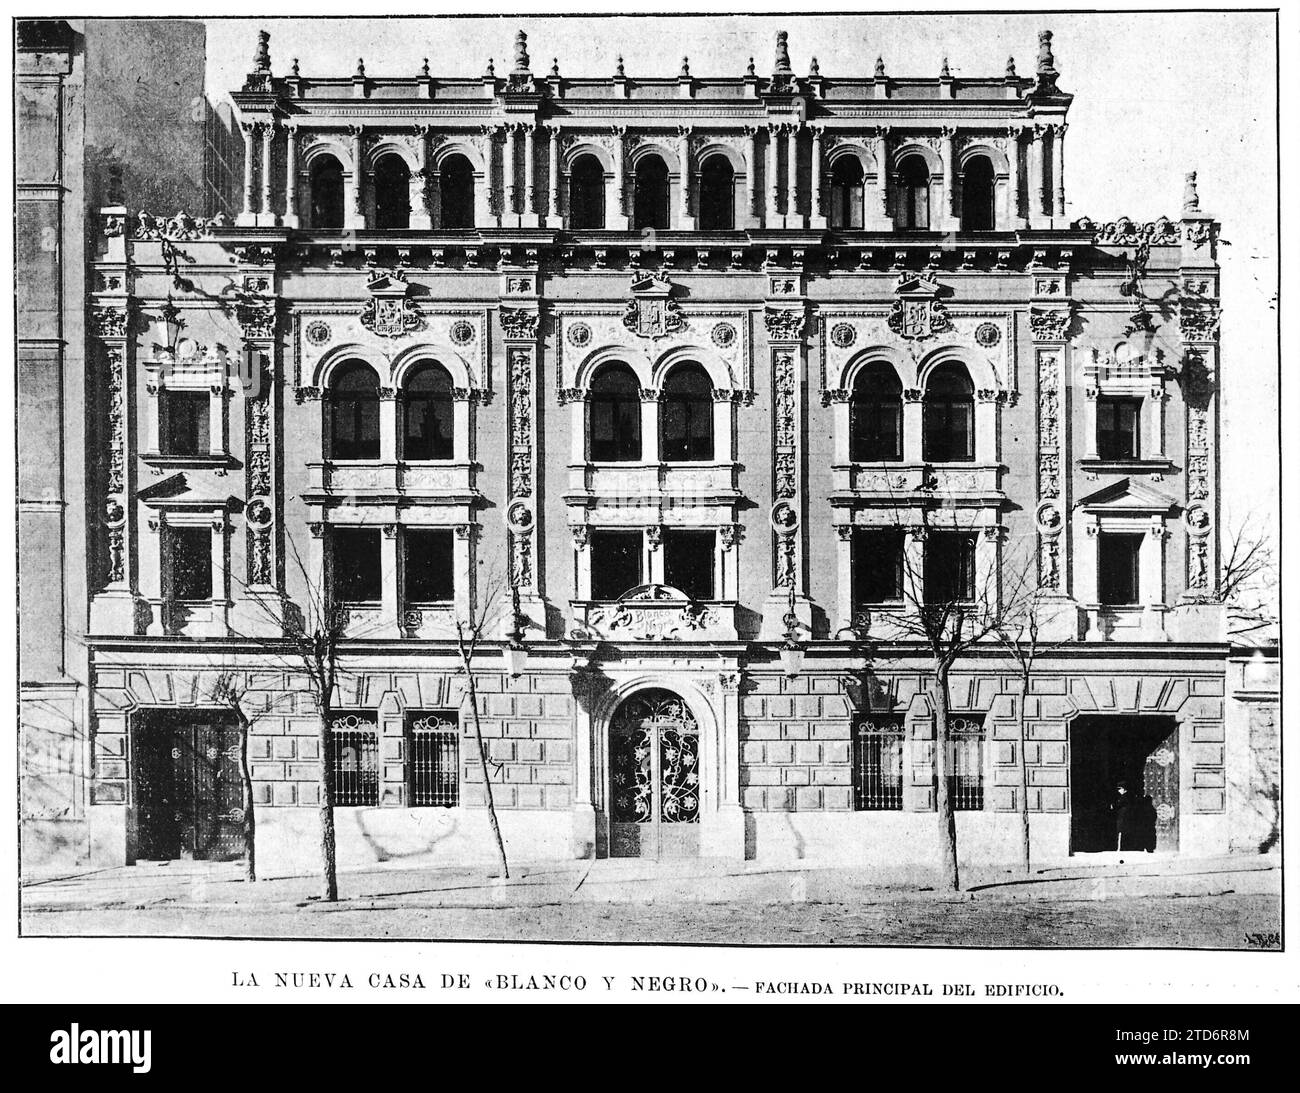 12/31/1927. The new house of black and white. Main façade of the Building. - -approximate date. Credit: Album / Archivo ABC Stock Photo